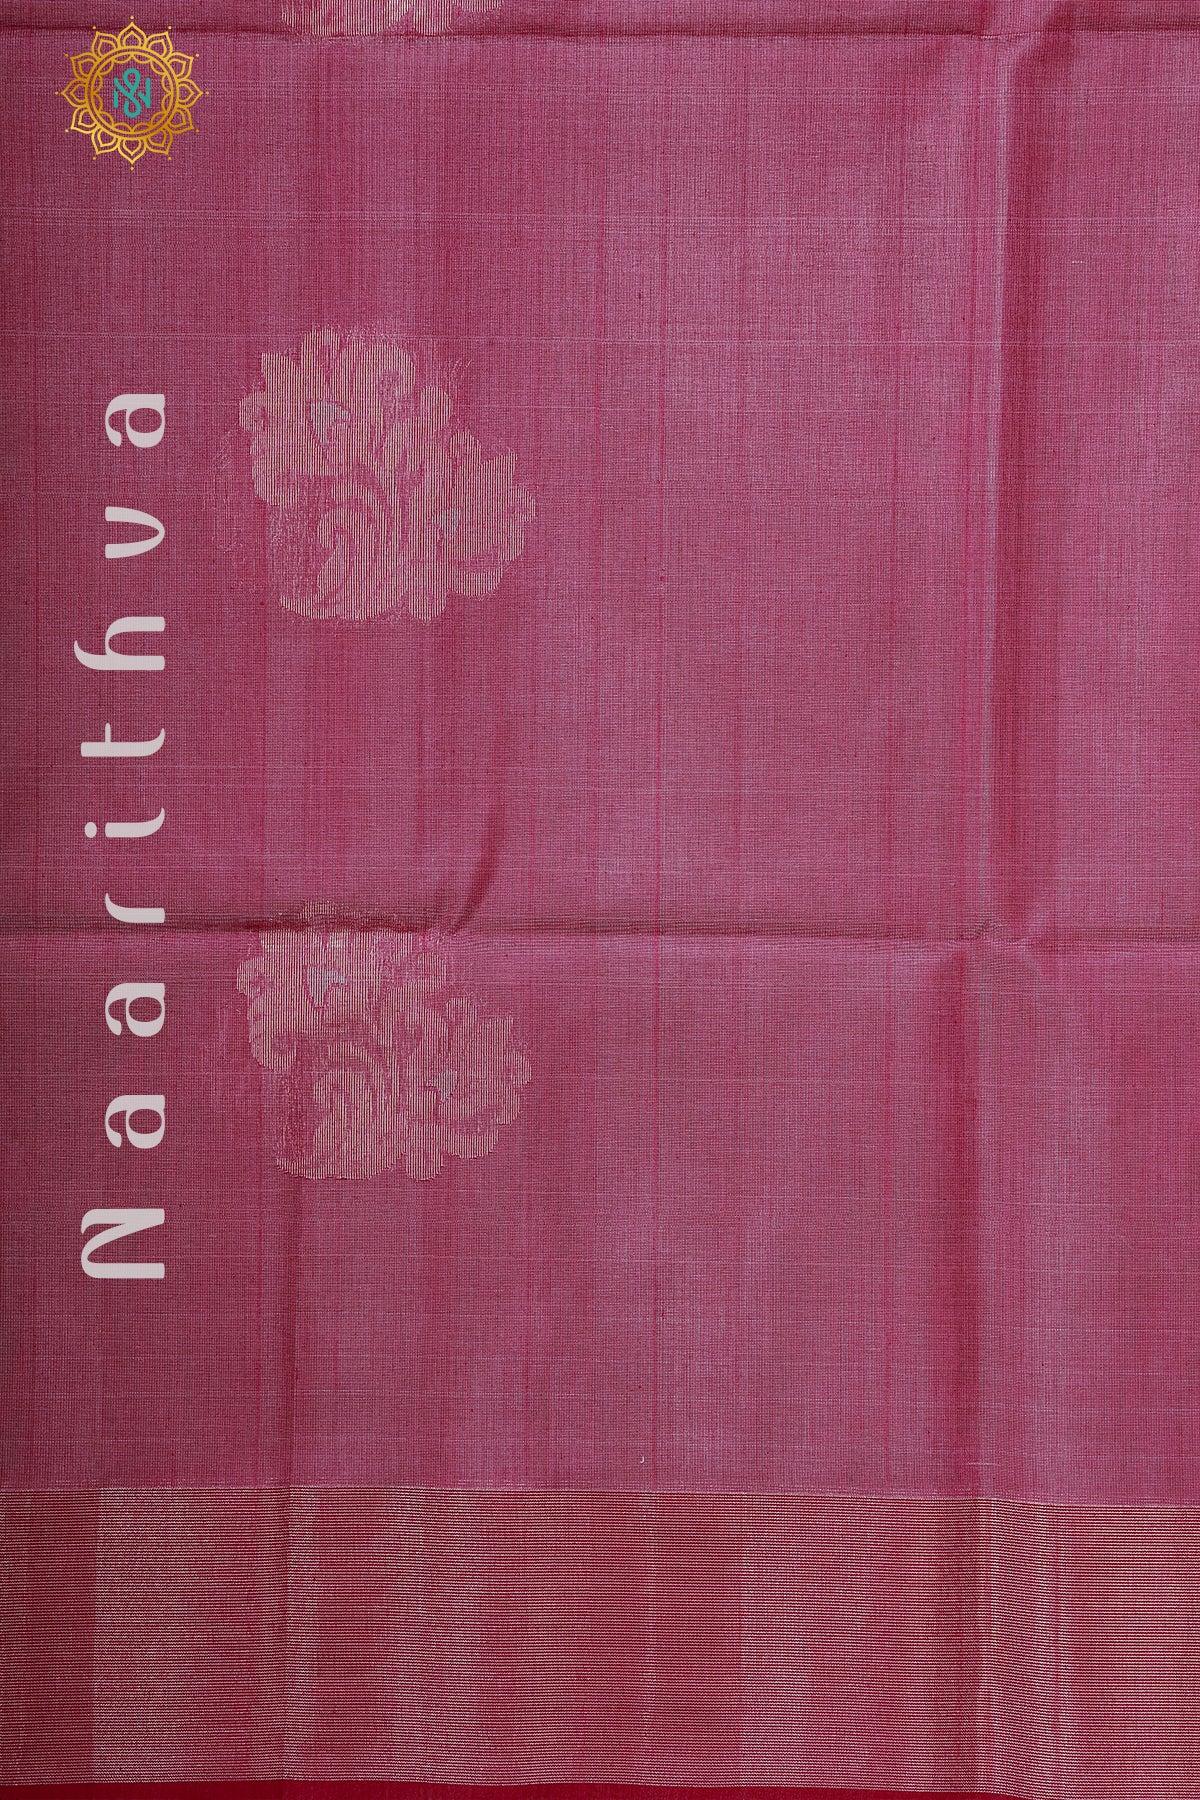 ROSE PINK WITH MAROON - SILK COTTON